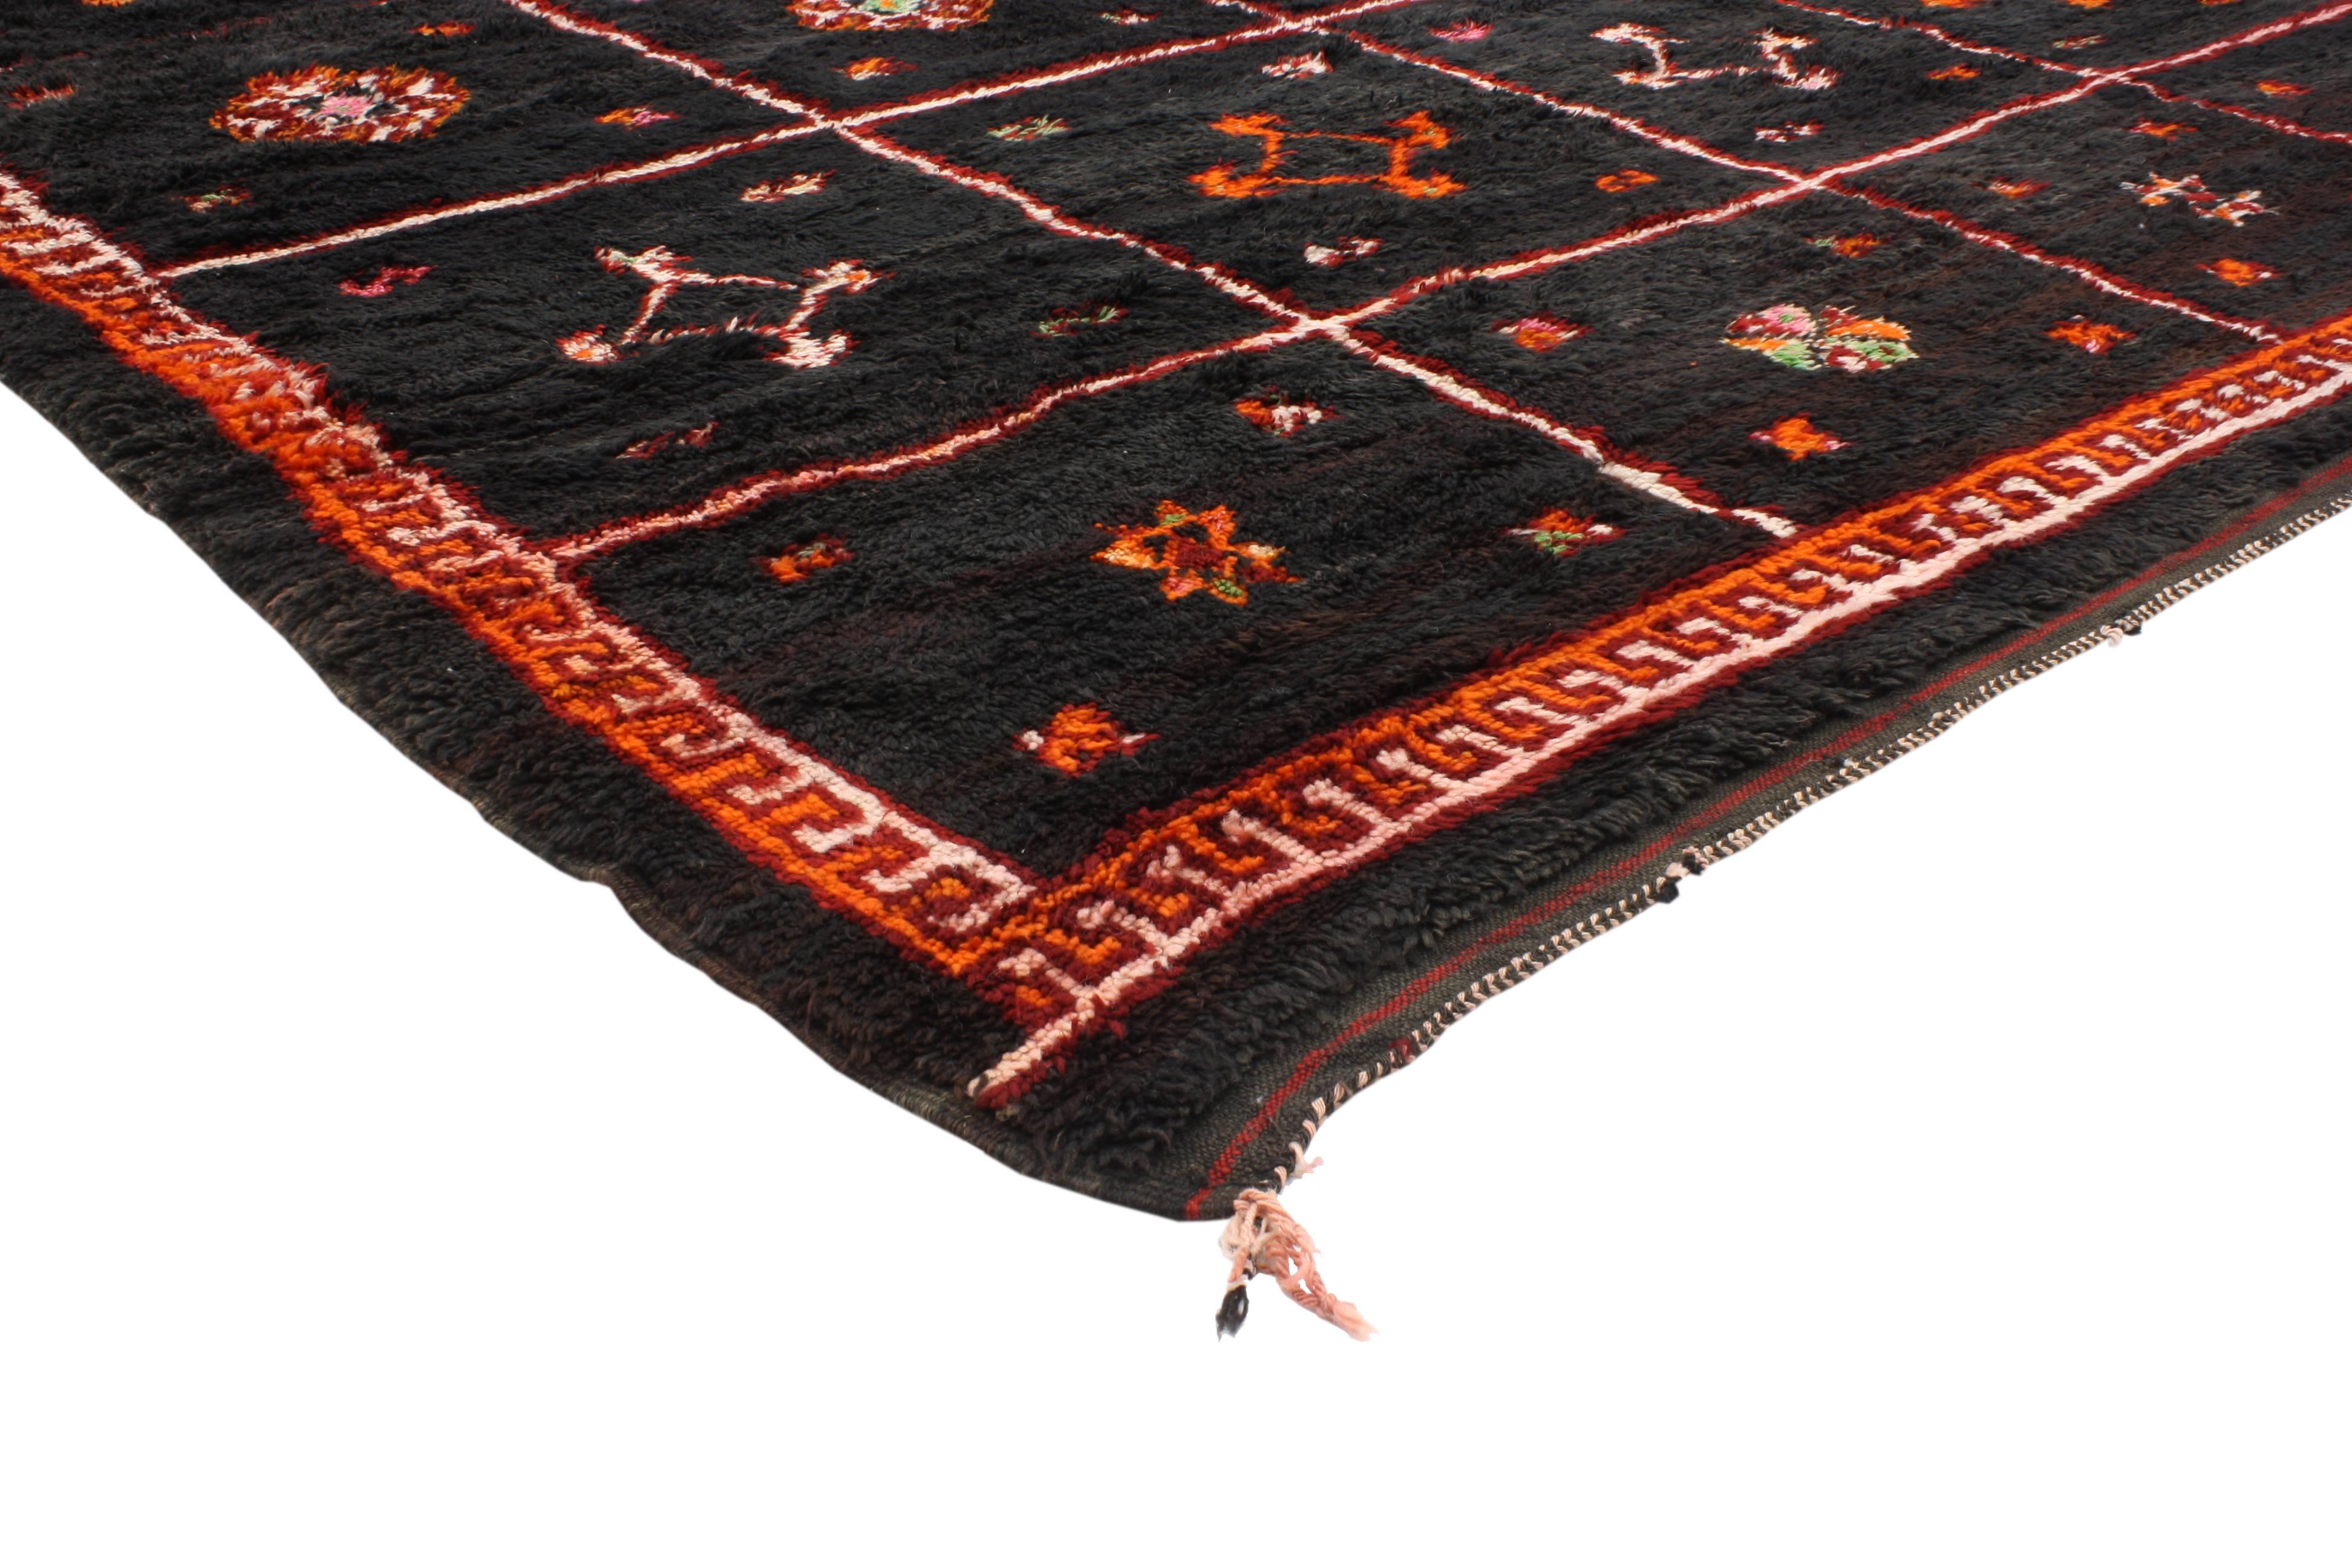 20337 Vintage Moroccan Rug, Black Moroccan Area Rug with Tribal Style. With a spectacular twist on Primitive Folk Art charm, this vintage Berber Moroccan rug features a modern tribal design. Classically composed and boasting a truly magnificent